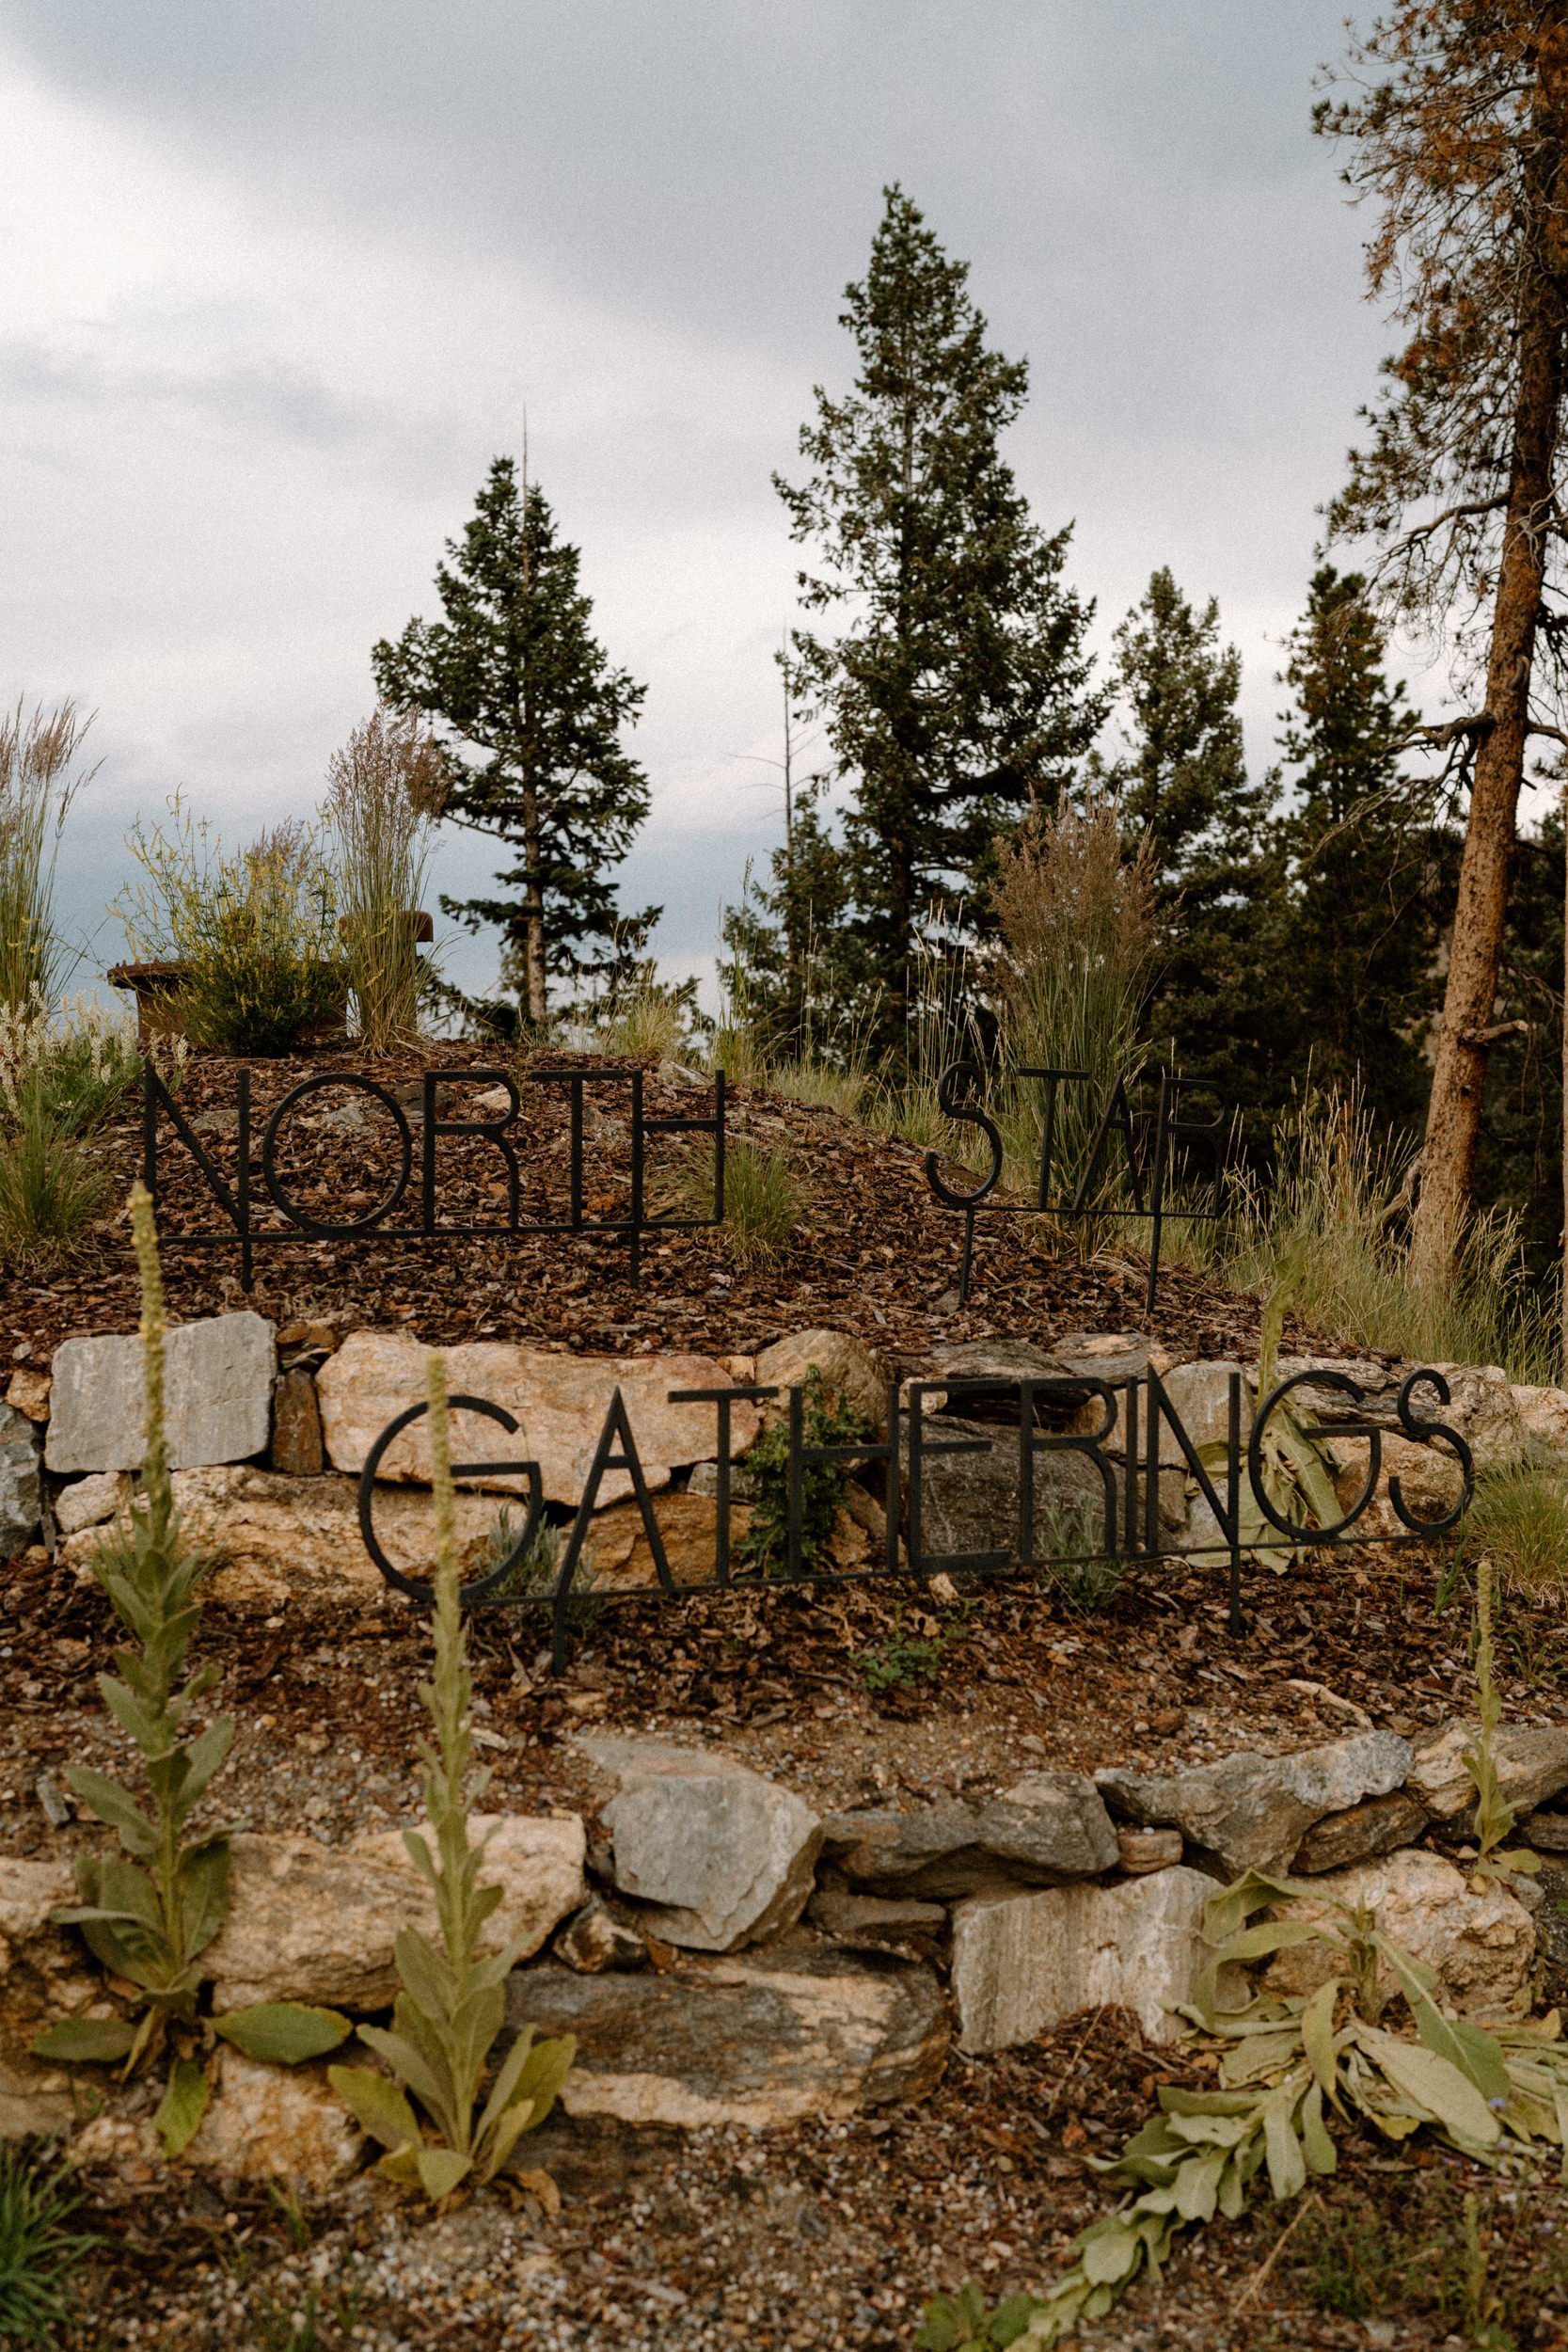 A metal sign that reads "North Star Gatherings"